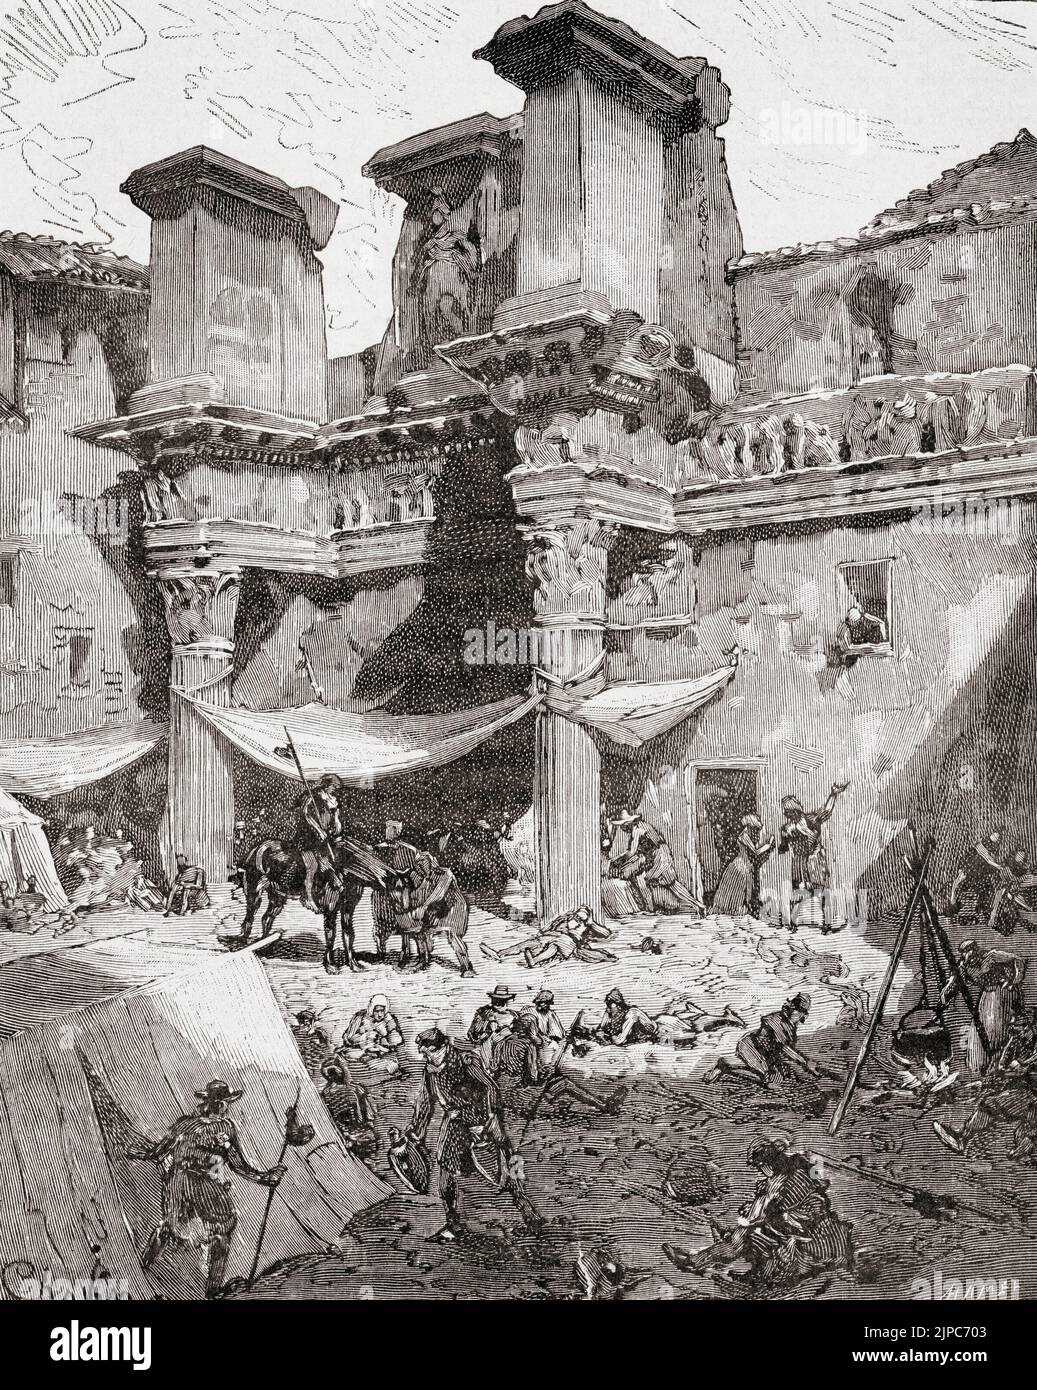 In the year 1300 Pope Boniface VIII convoked a holy year during which slaves and prisoners would be freed, debts would be forgiven and the mercies of God would be particularly manifest, people came from far and wide and camped in the streets and squares of Rome.  From Histoire de France, published 1855. Stock Photo